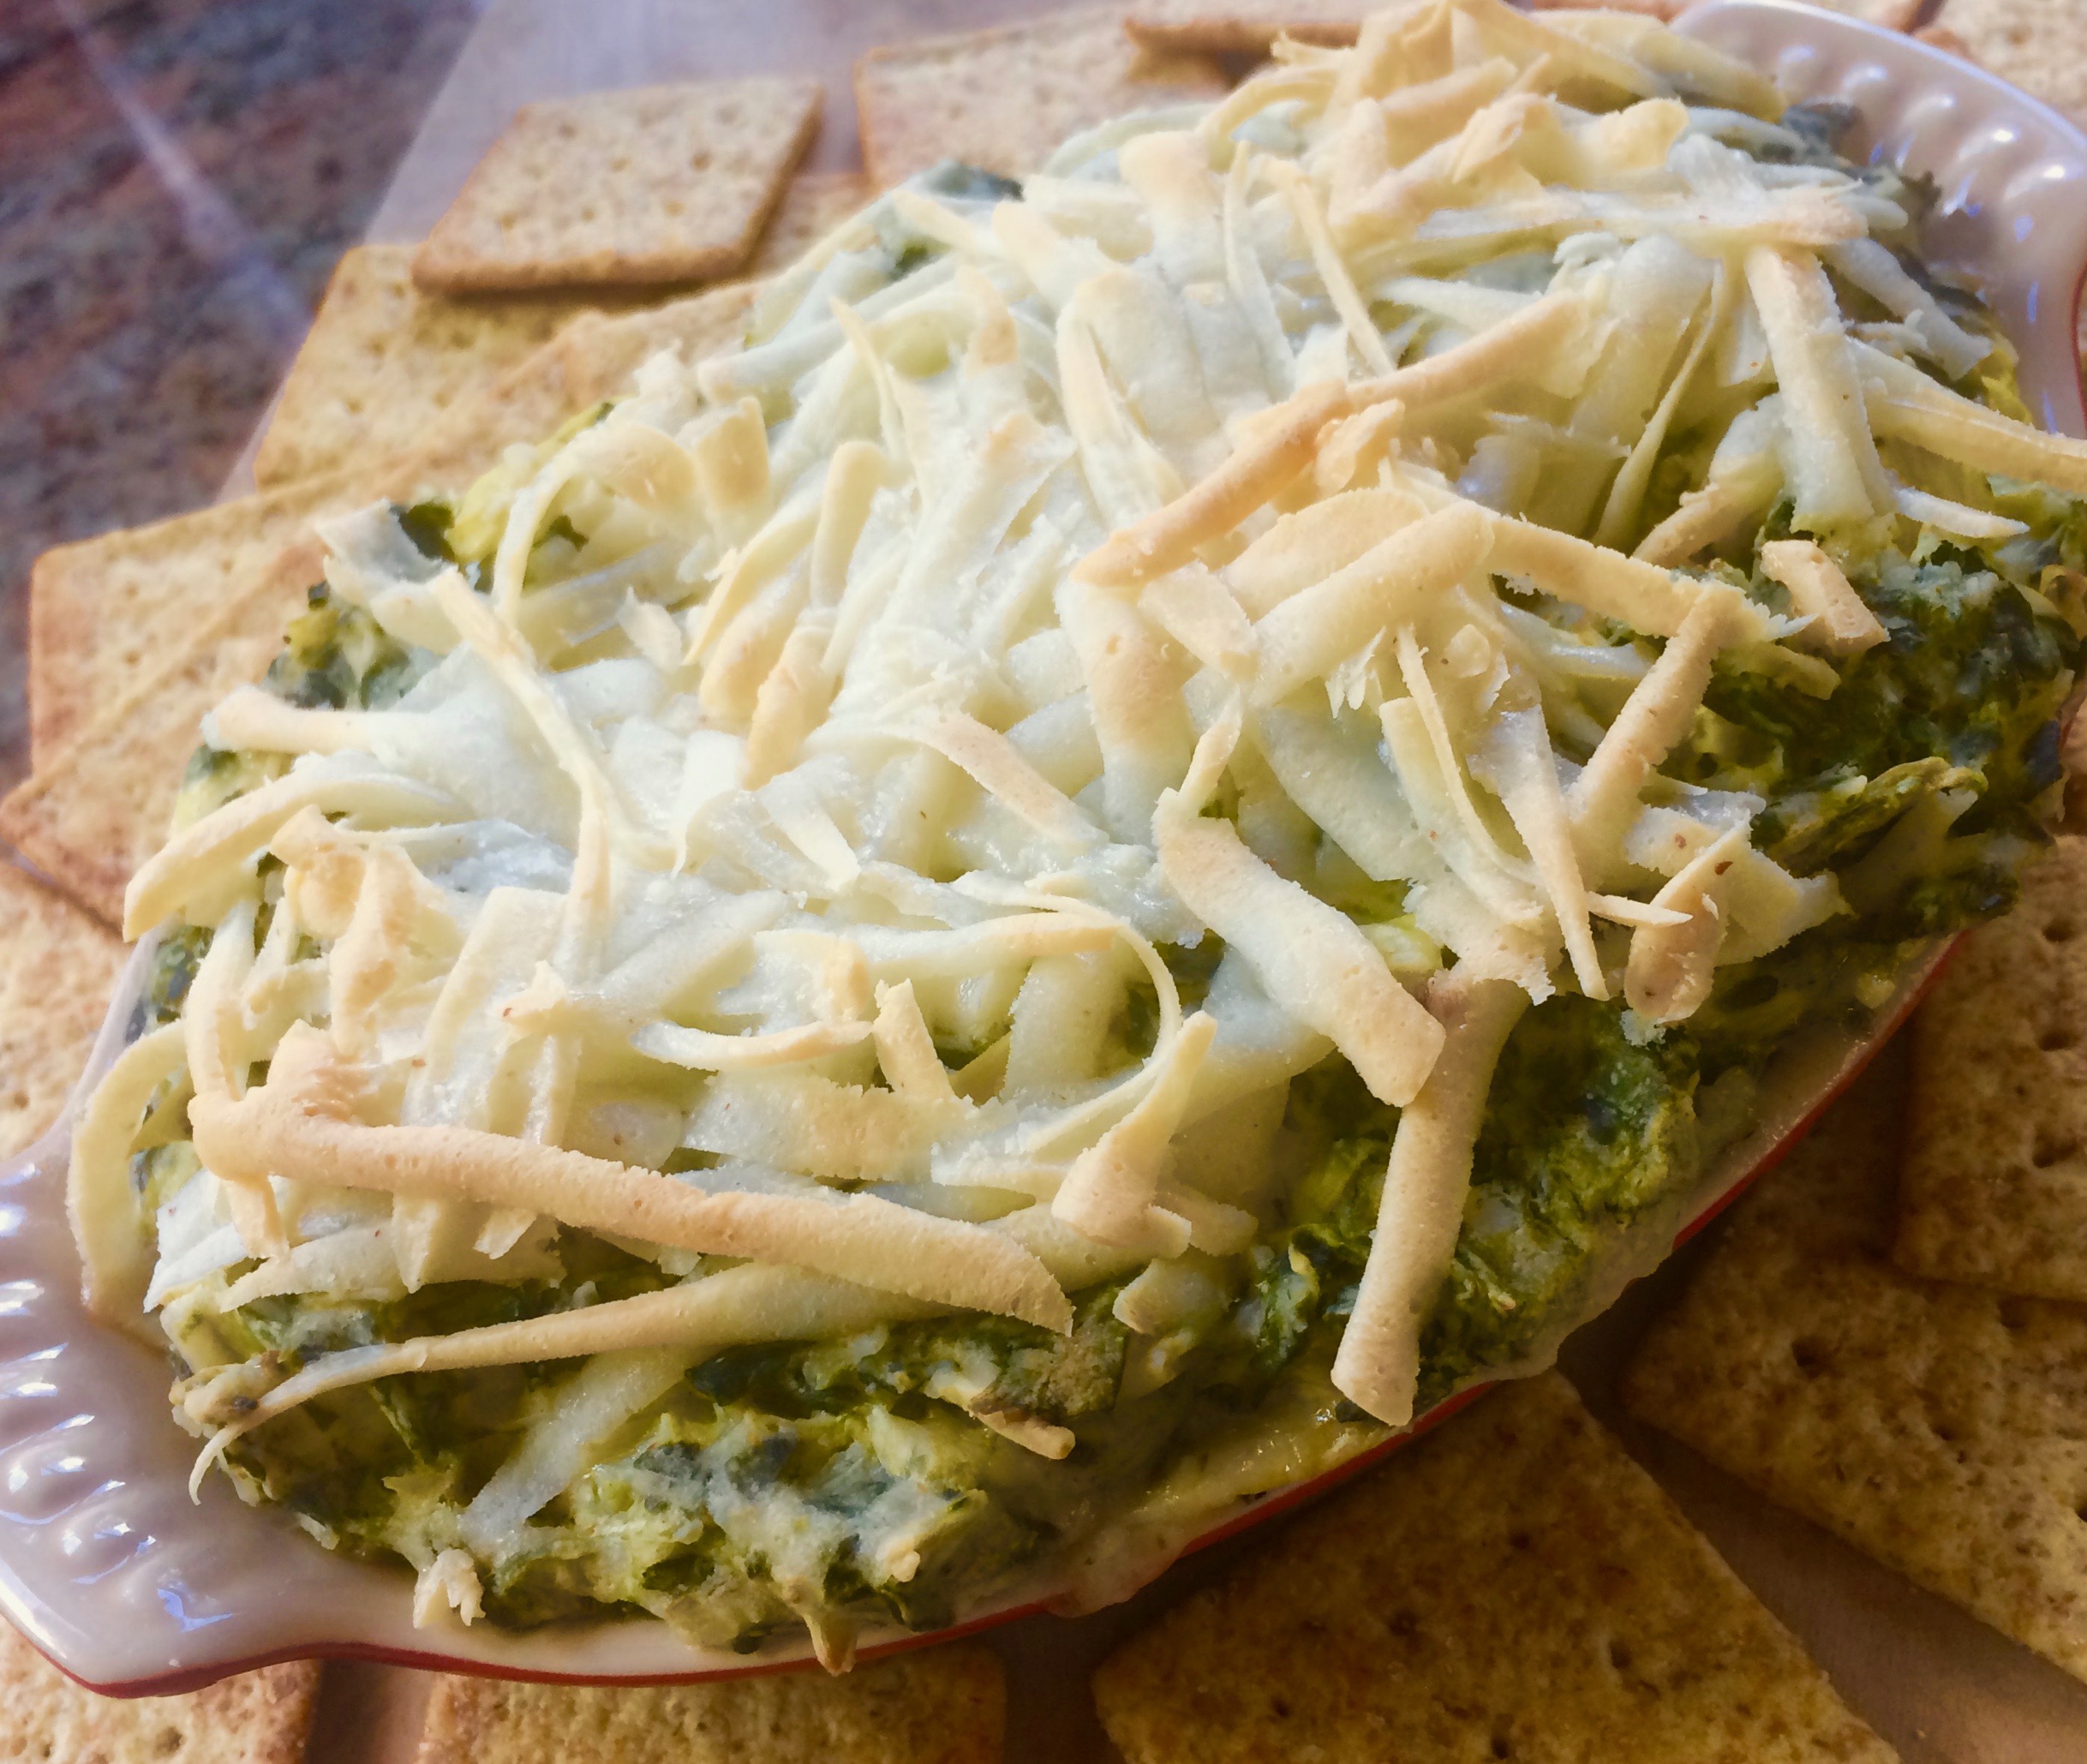 Vegan Spinach Dip with Artichokes